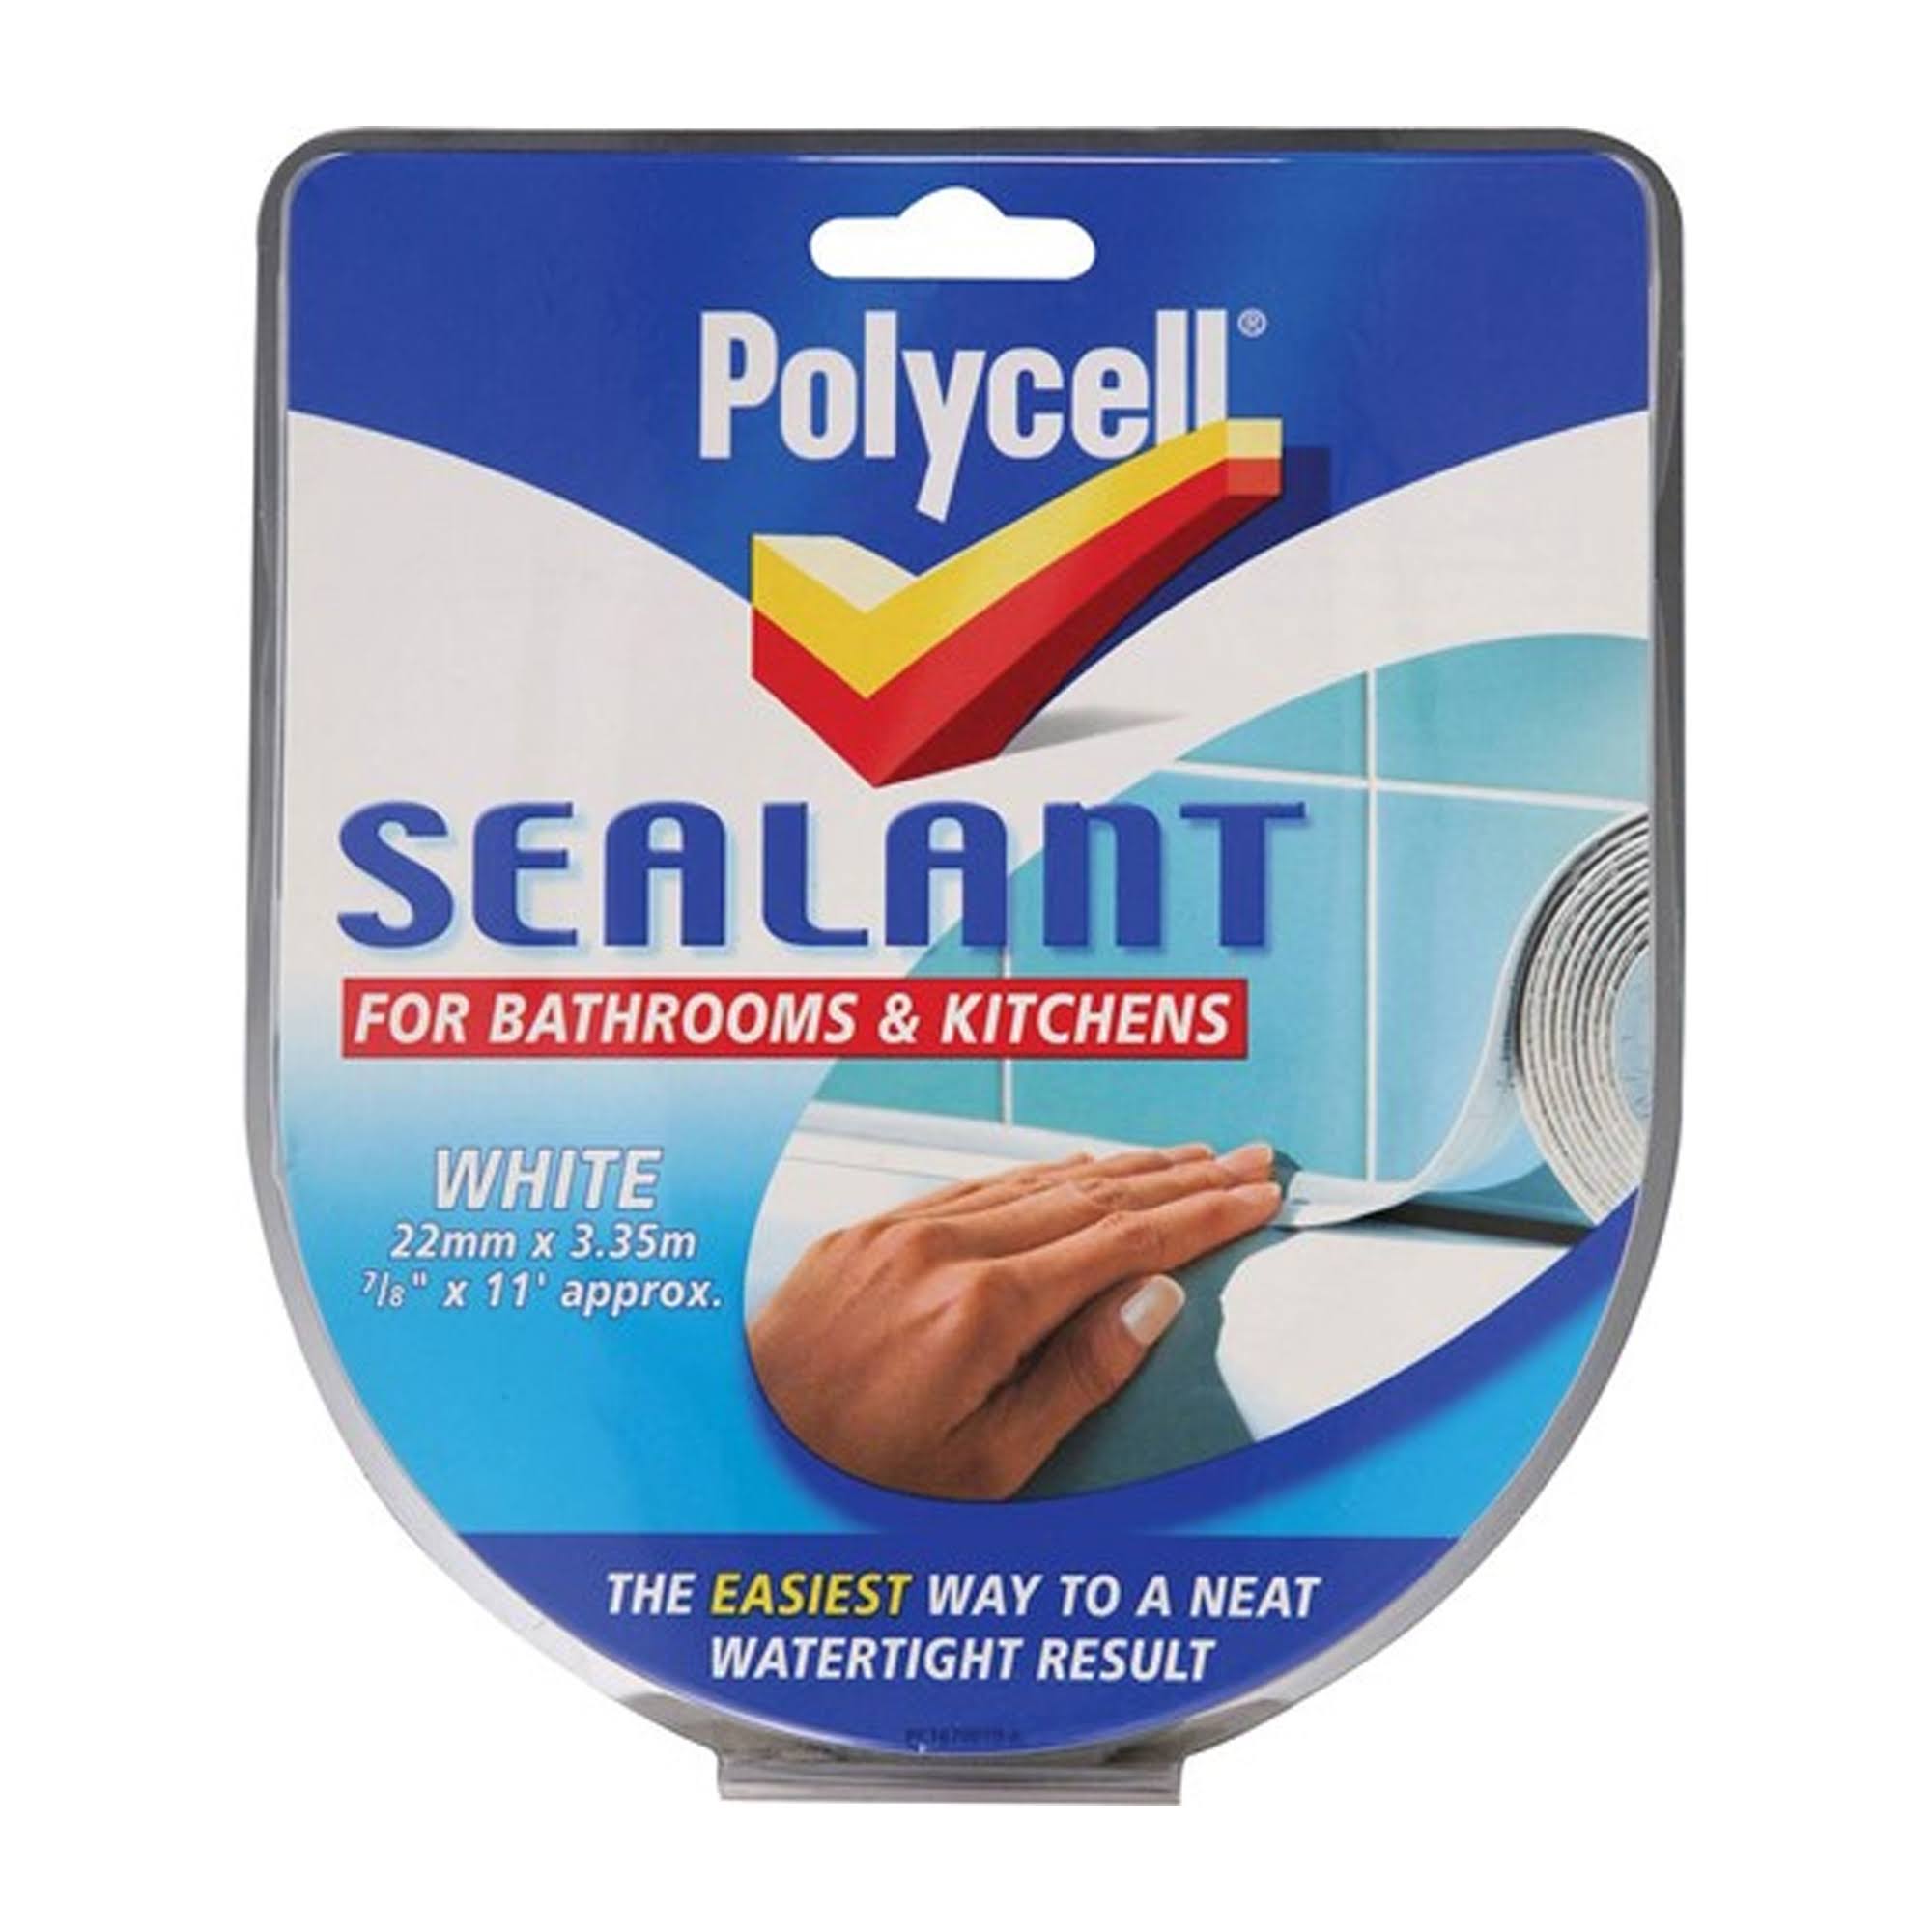 Polycell Bathroom and Kitchen Sealant Strip - White, 22mm